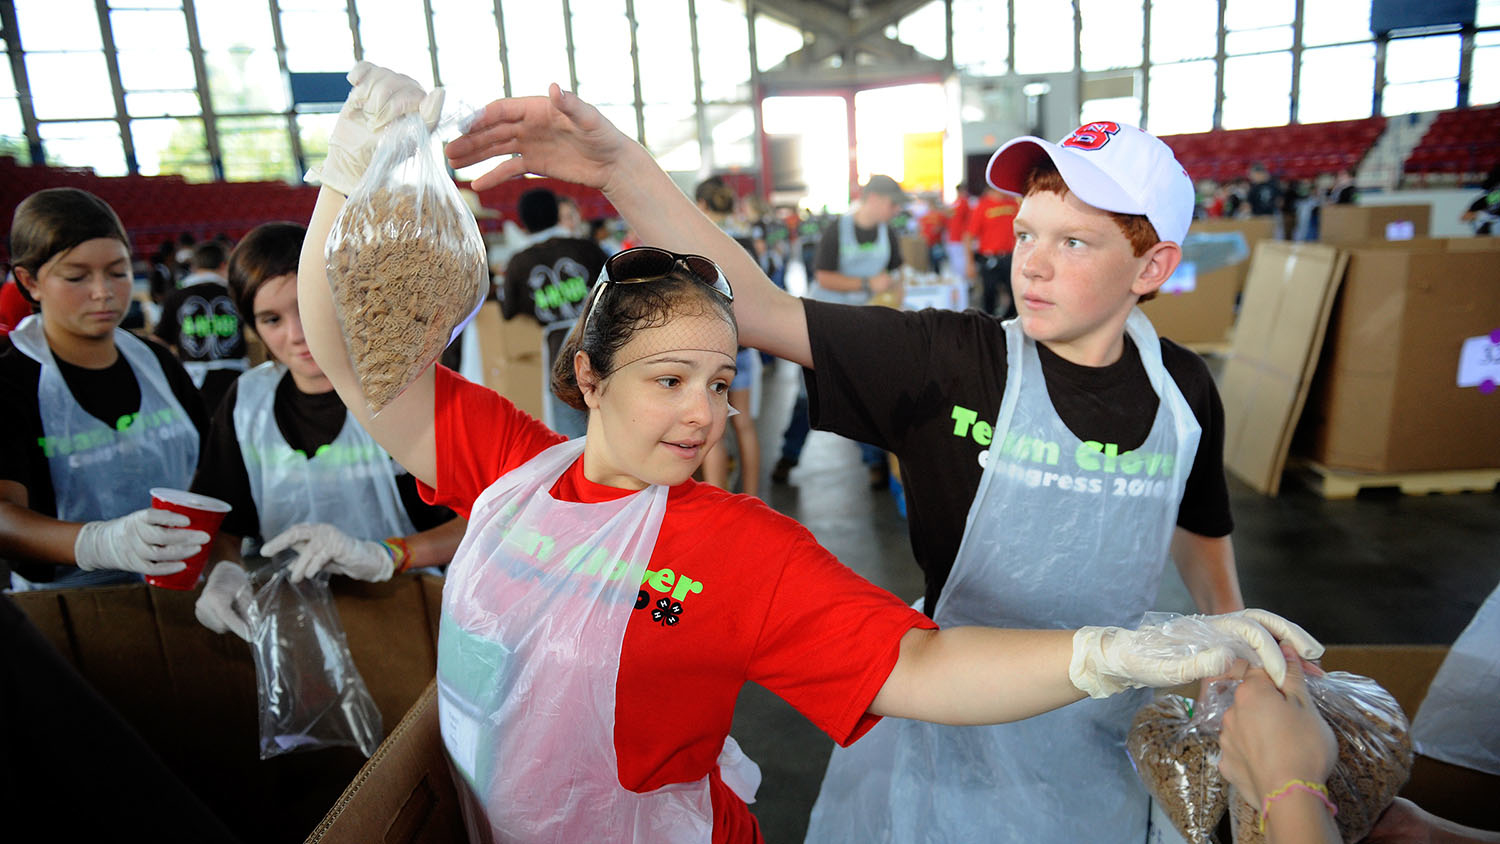 One 4-H student hands a bag of granola to another 4-H student, both wearing aprons.